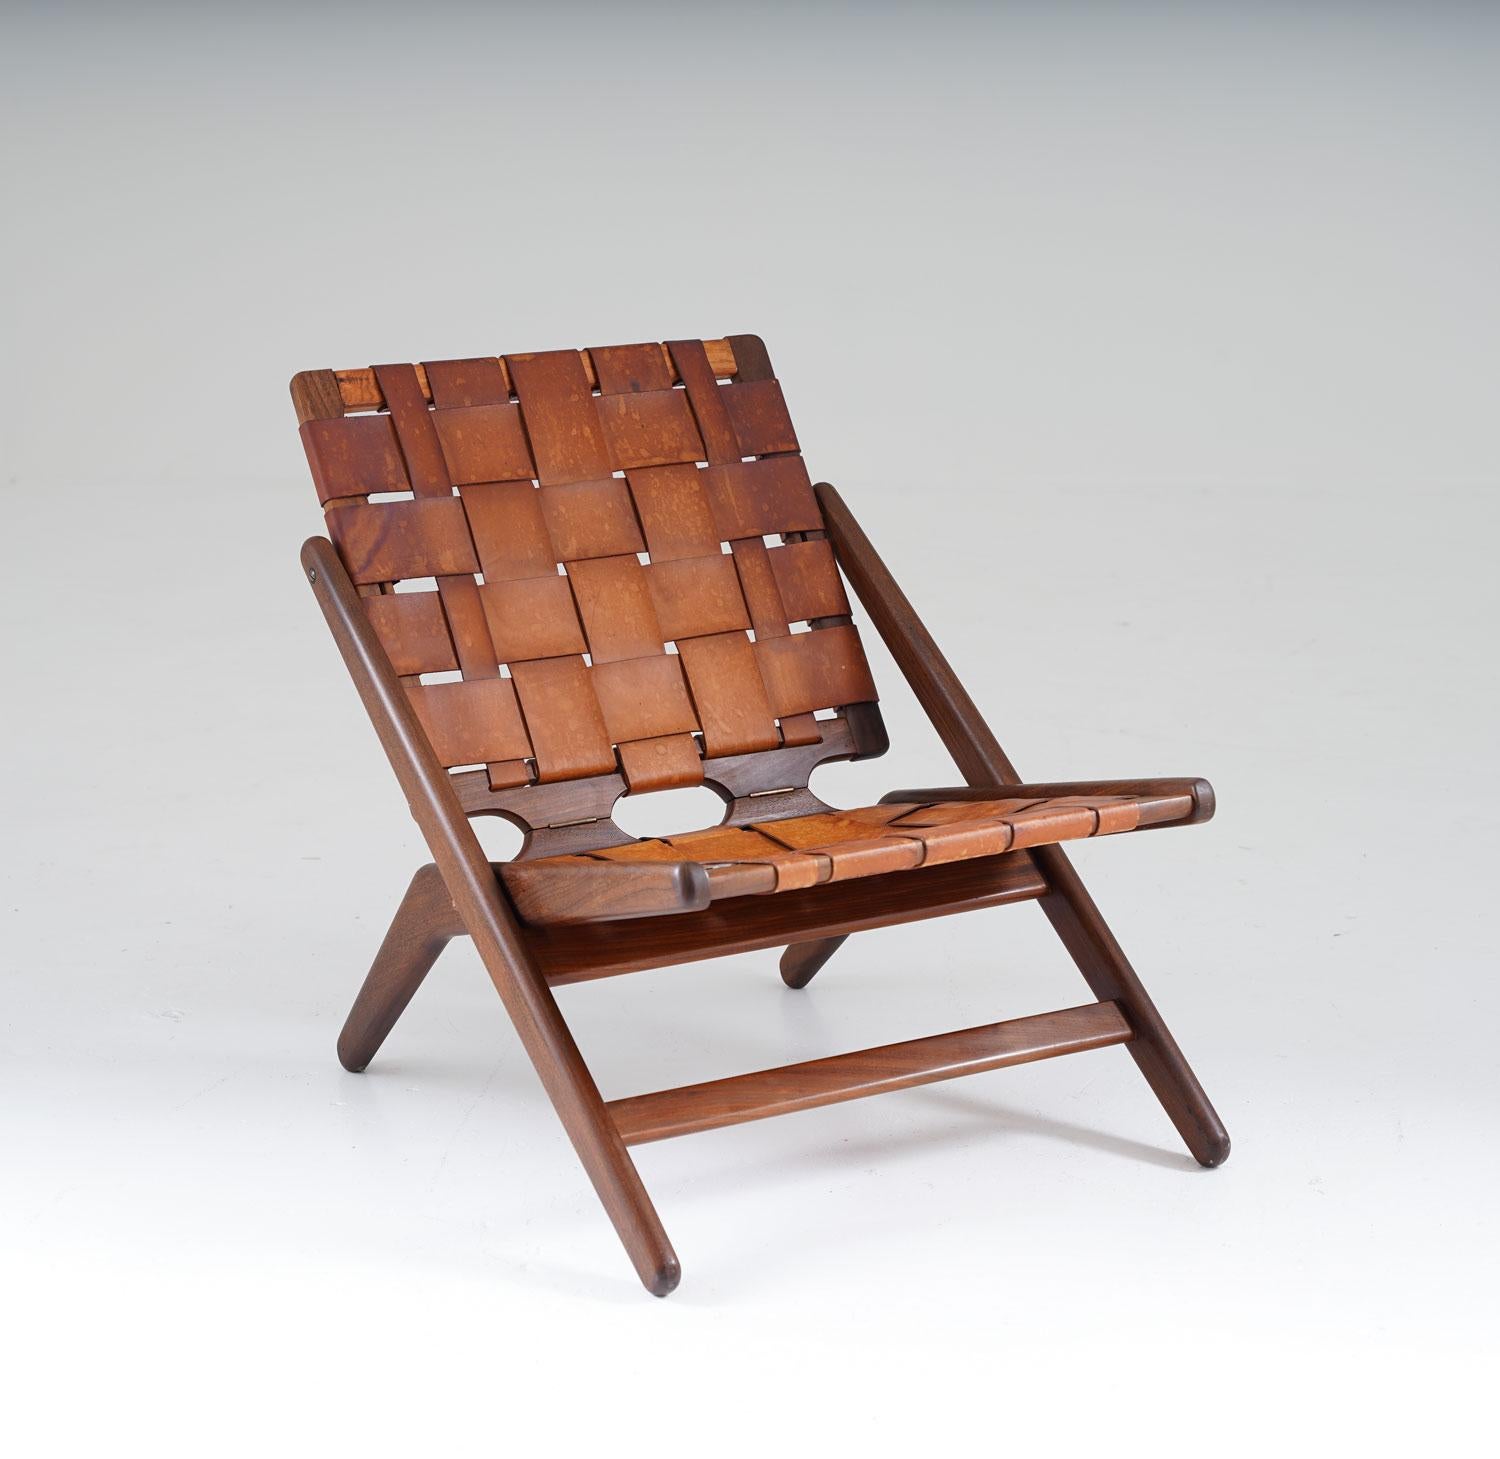 Stunning folding chair by Arne Hovmand-Olsen for Jutex.
The frame of the chair is highlighted by two sculptural shaped pieces of wood, crossing each other on the sides of the chair. It's upholstered in cognac-colored leather with perfect patina.